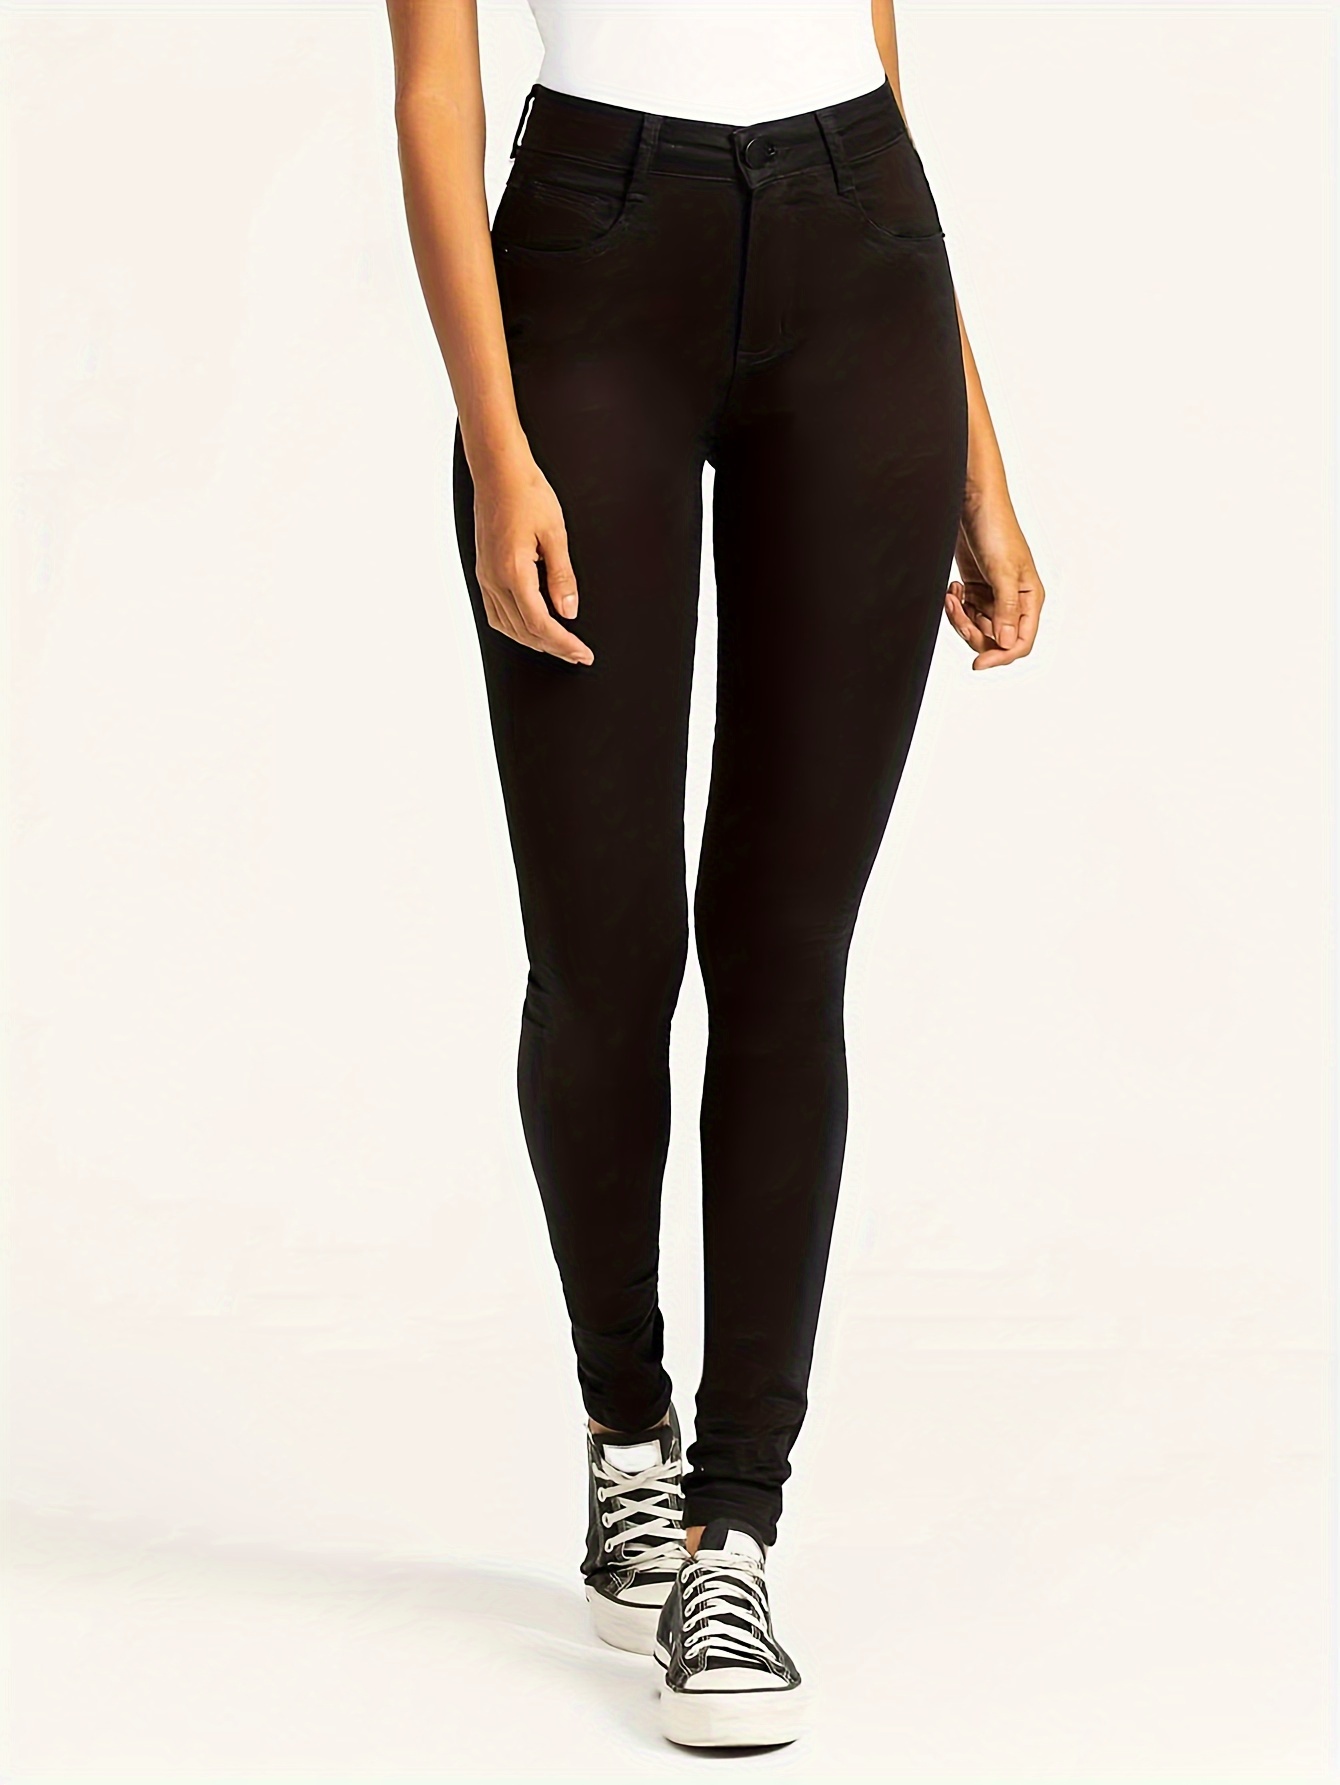 Stylish High Rise Stretch Pants by A New Day